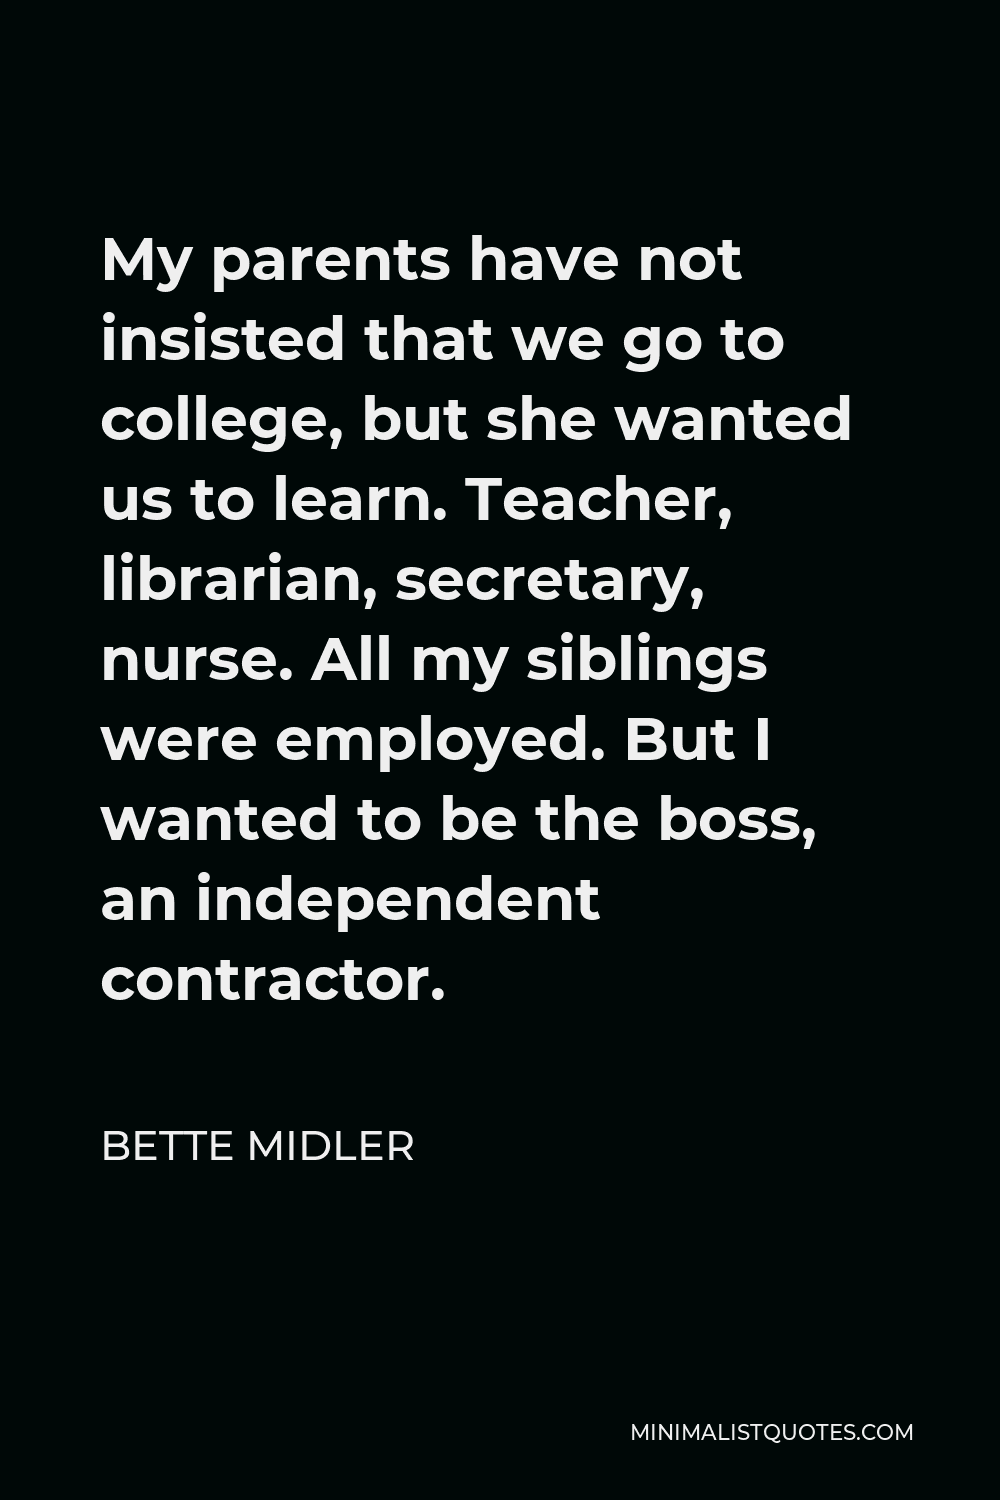 Bette Midler Quote - My parents have not insisted that we go to college, but she wanted us to learn. Teacher, librarian, secretary, nurse. All my siblings were employed. But I wanted to be the boss, an independent contractor.